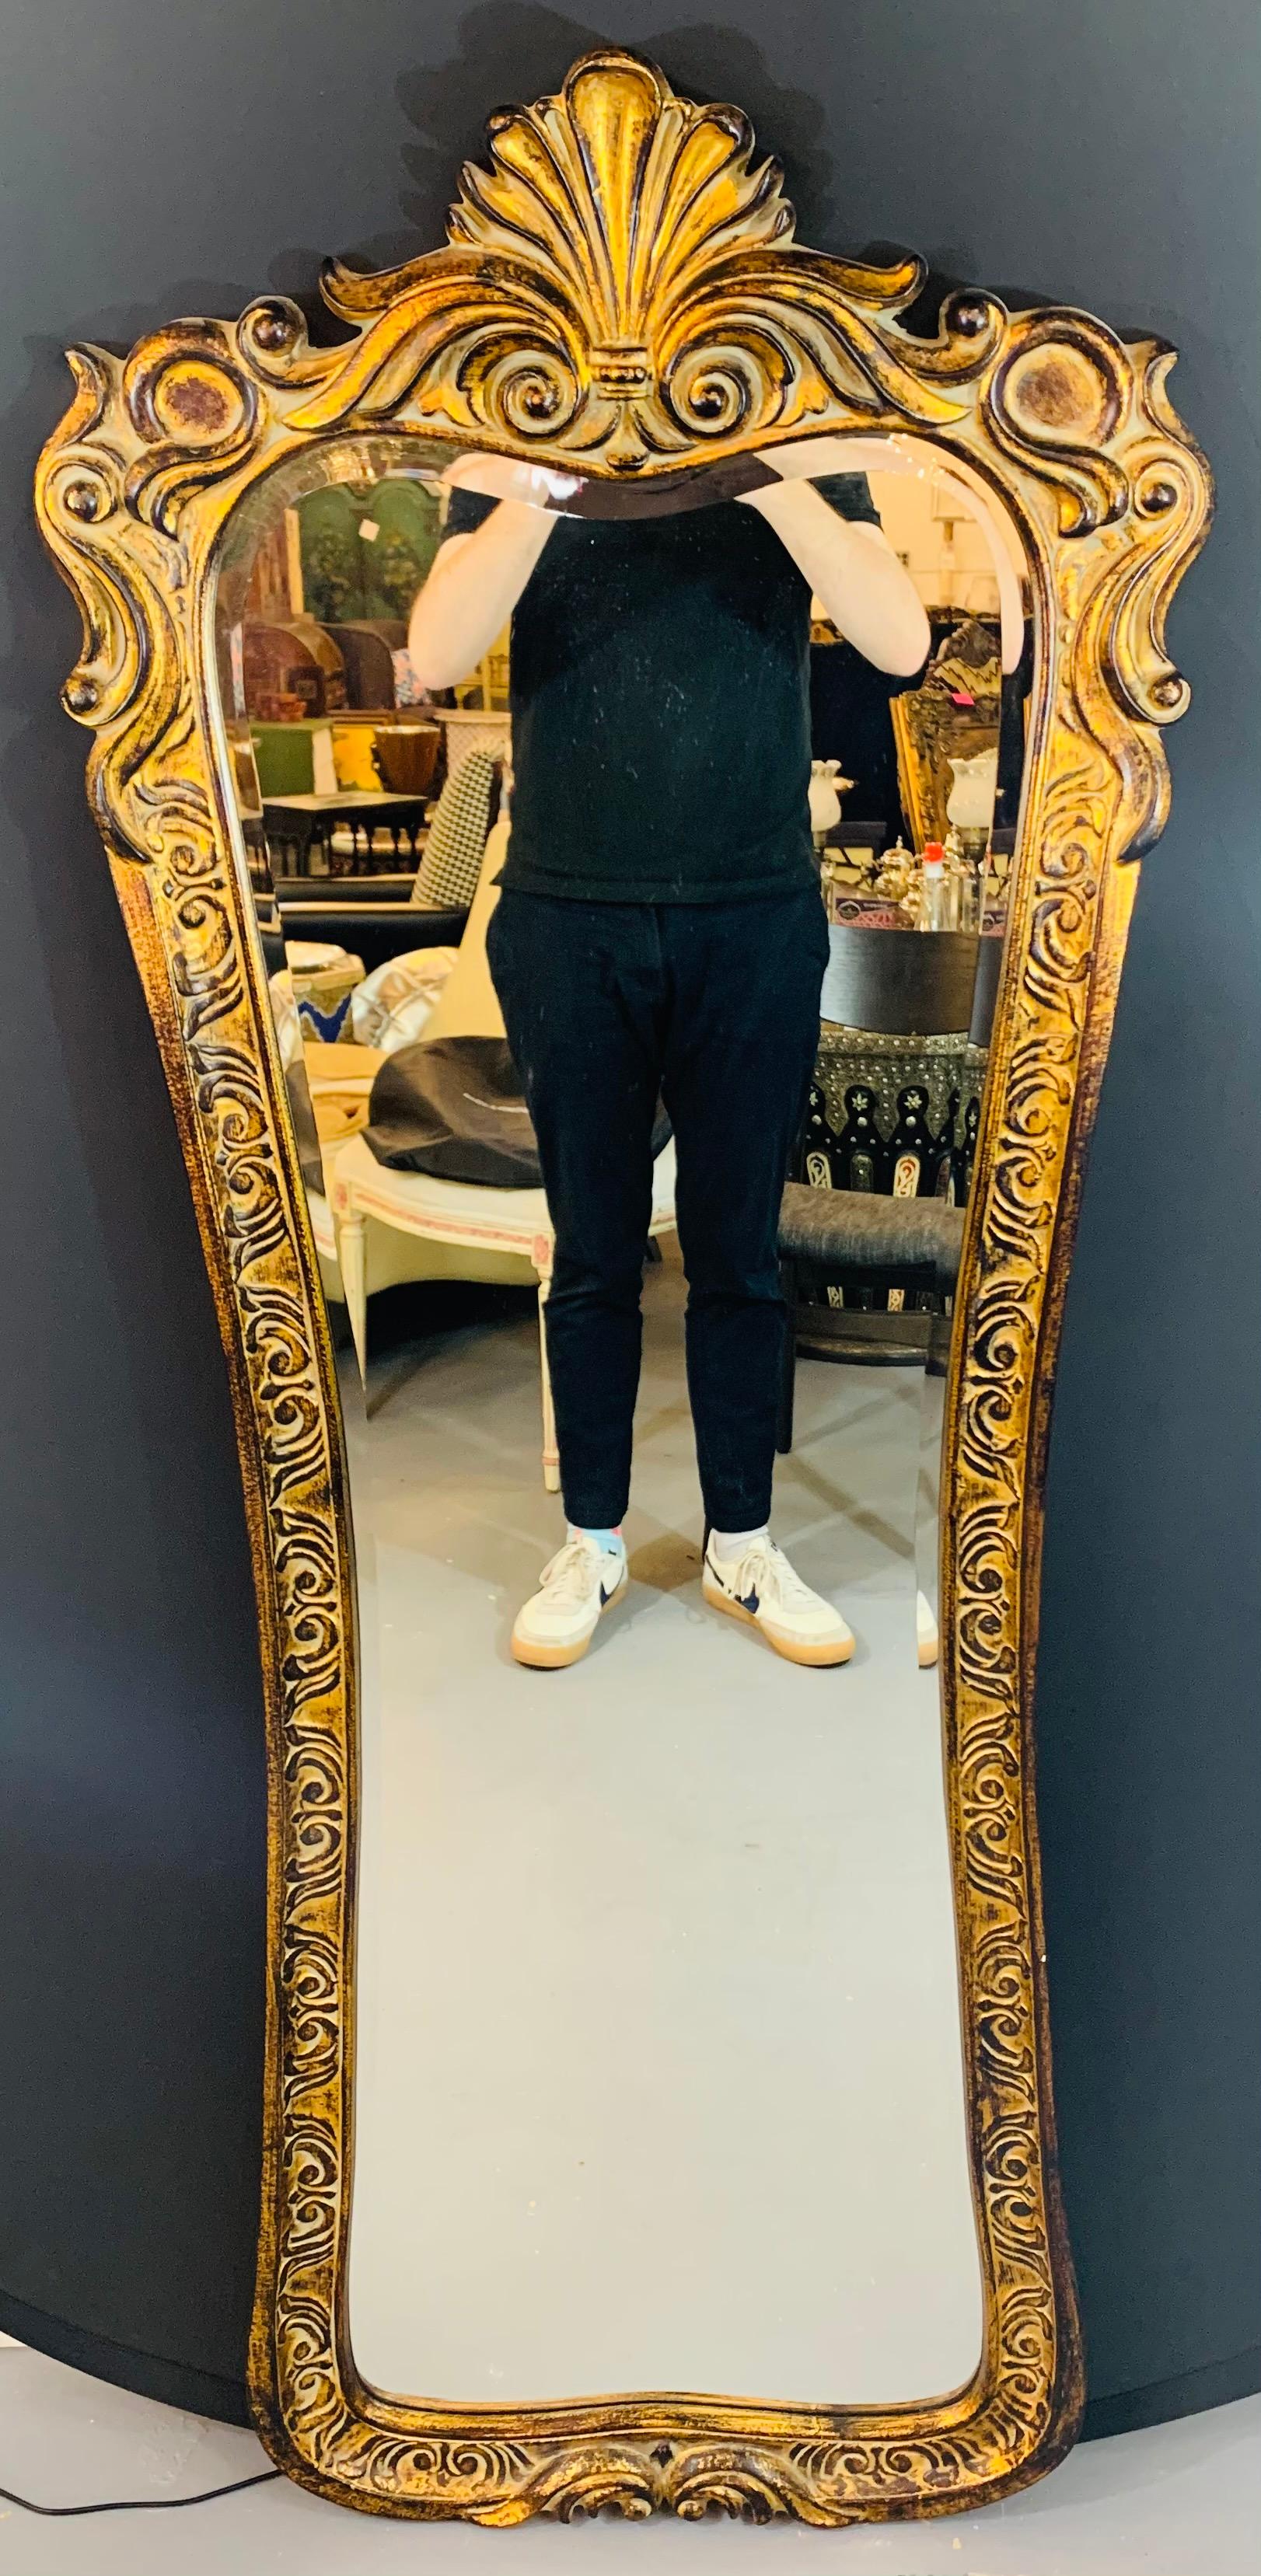 A stylish and elegant tall wall or depressing mirror in Regency style. The mirror is beautifully hand carved of gilded antiqued wood. Elevate your bedroom, walk in closet or dressing room style with this lovely mirror. 

Dimensions: 23